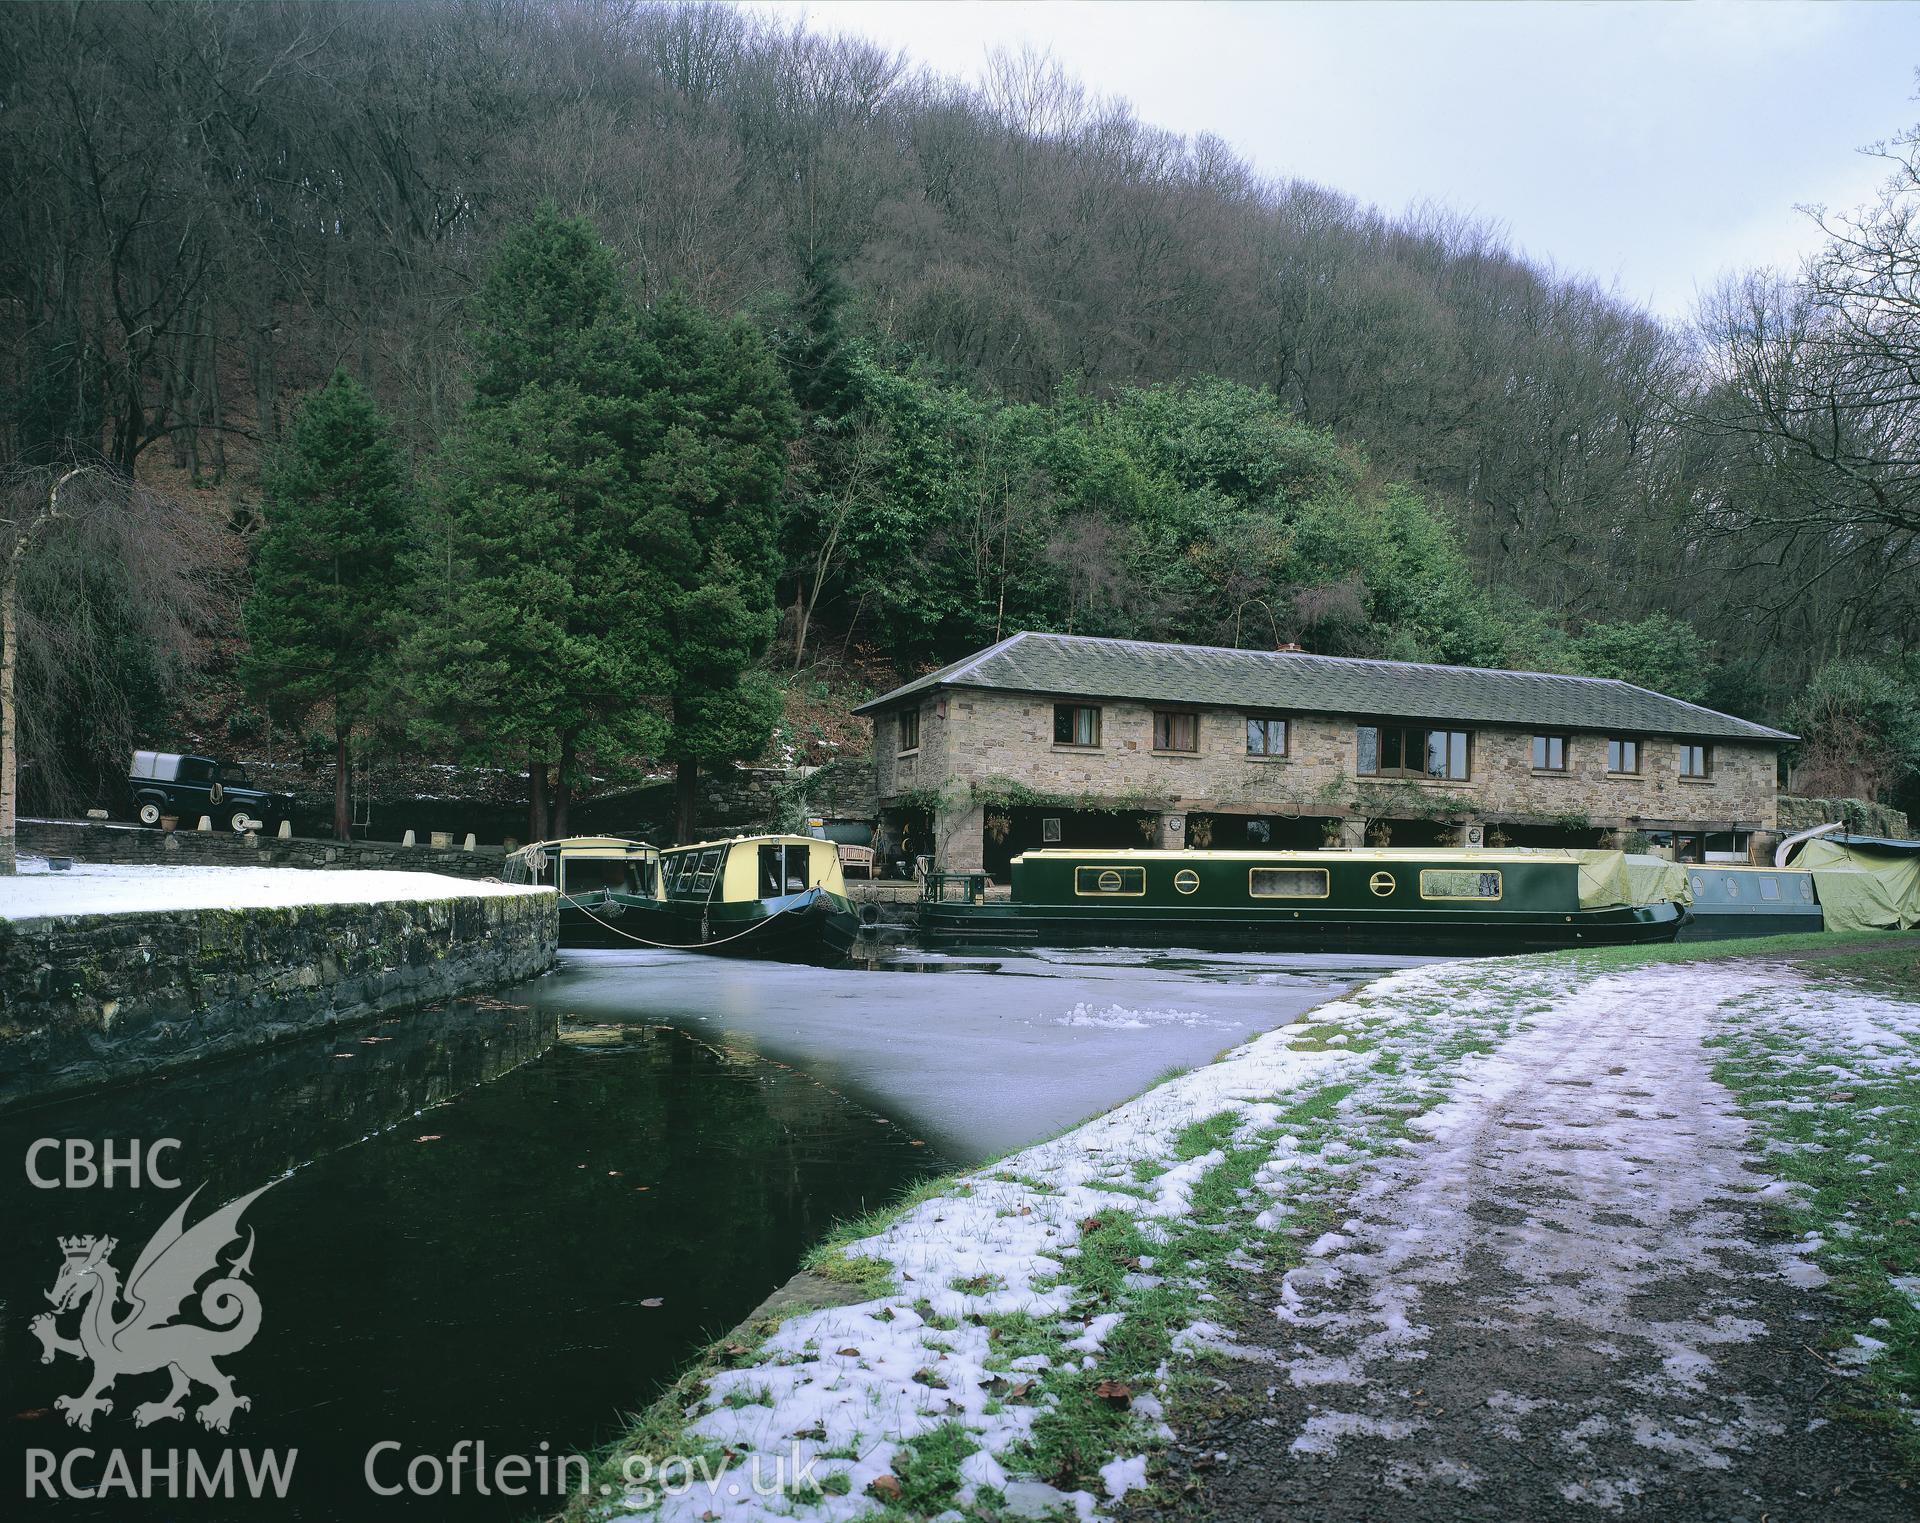 Digitized copy of a colour transparency showing general view of Llanfoist Wharf, Brecknock and Abergavenny Canal taken by Iain Wright, 2004. Original not yet transferred to NMR Archive.